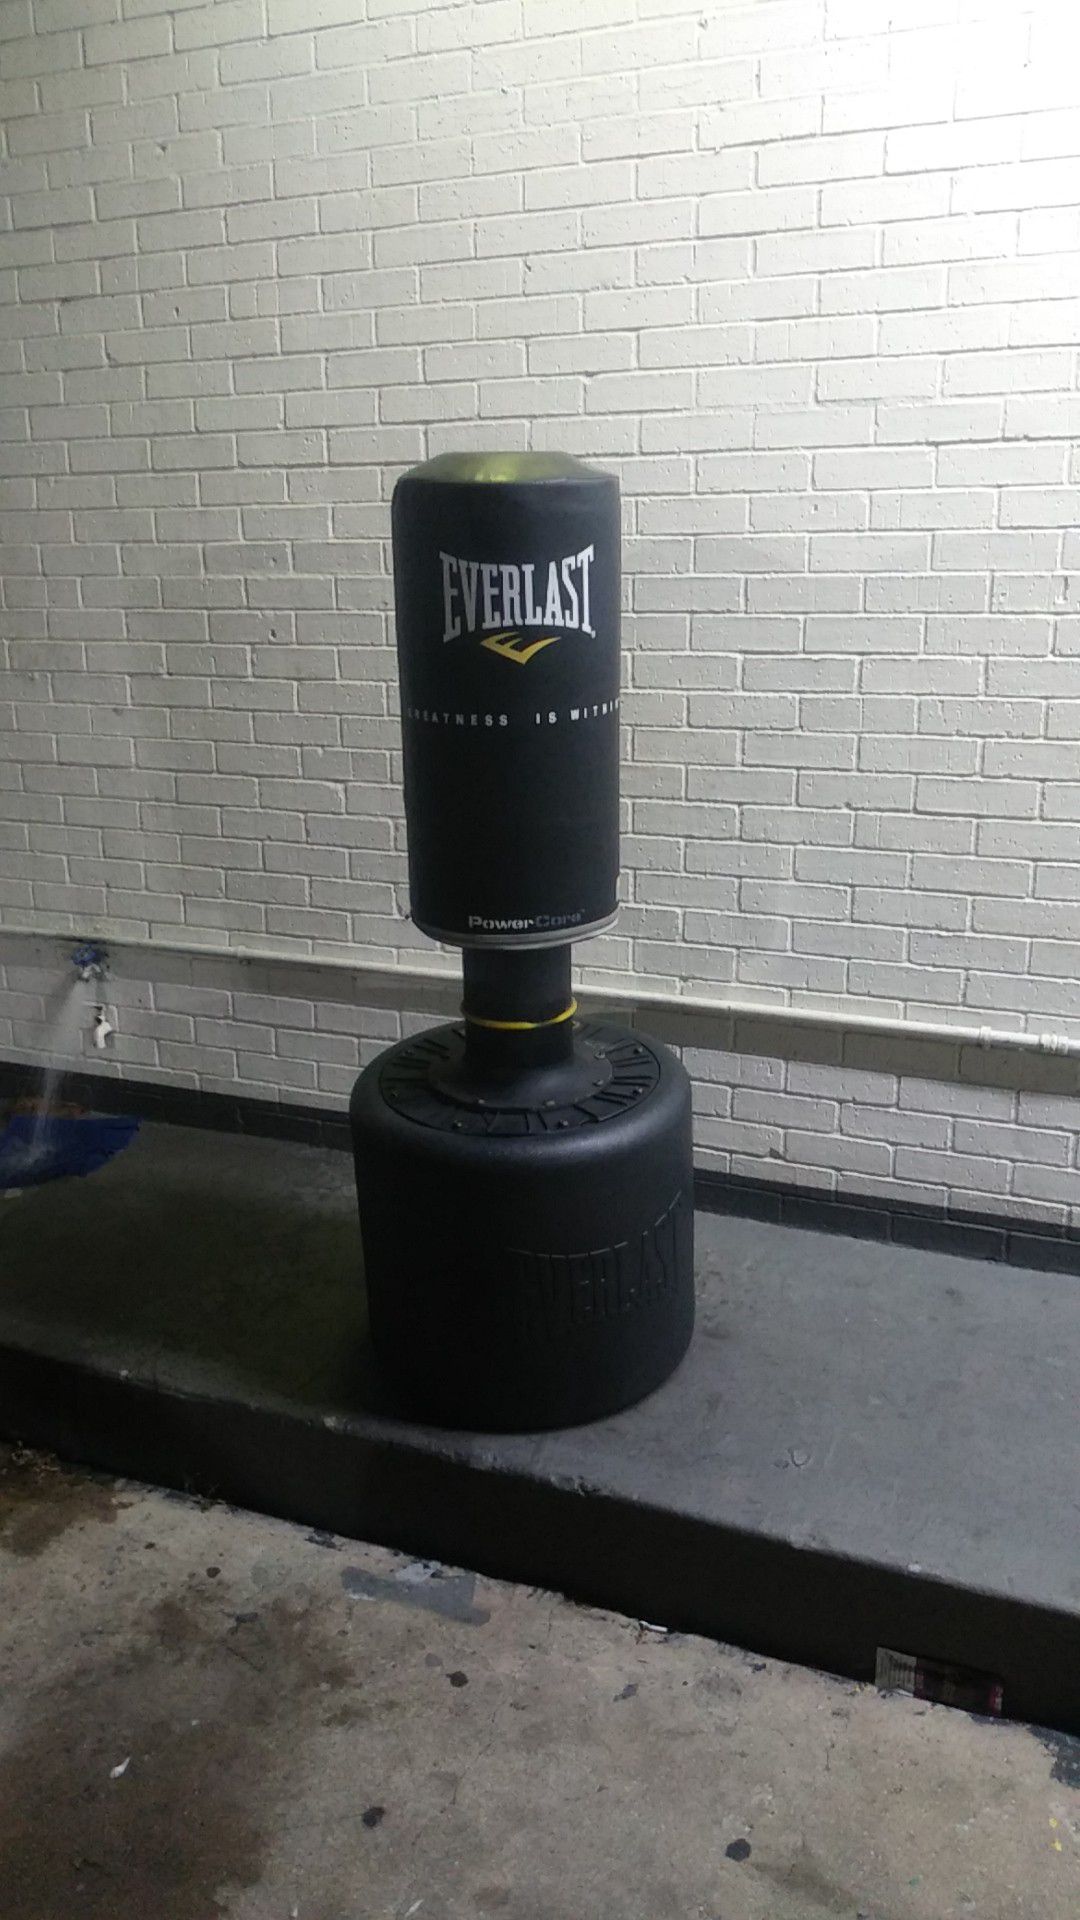 Moving.. Must sell Everlast punching bag with stand. Great working condition $55 OBO